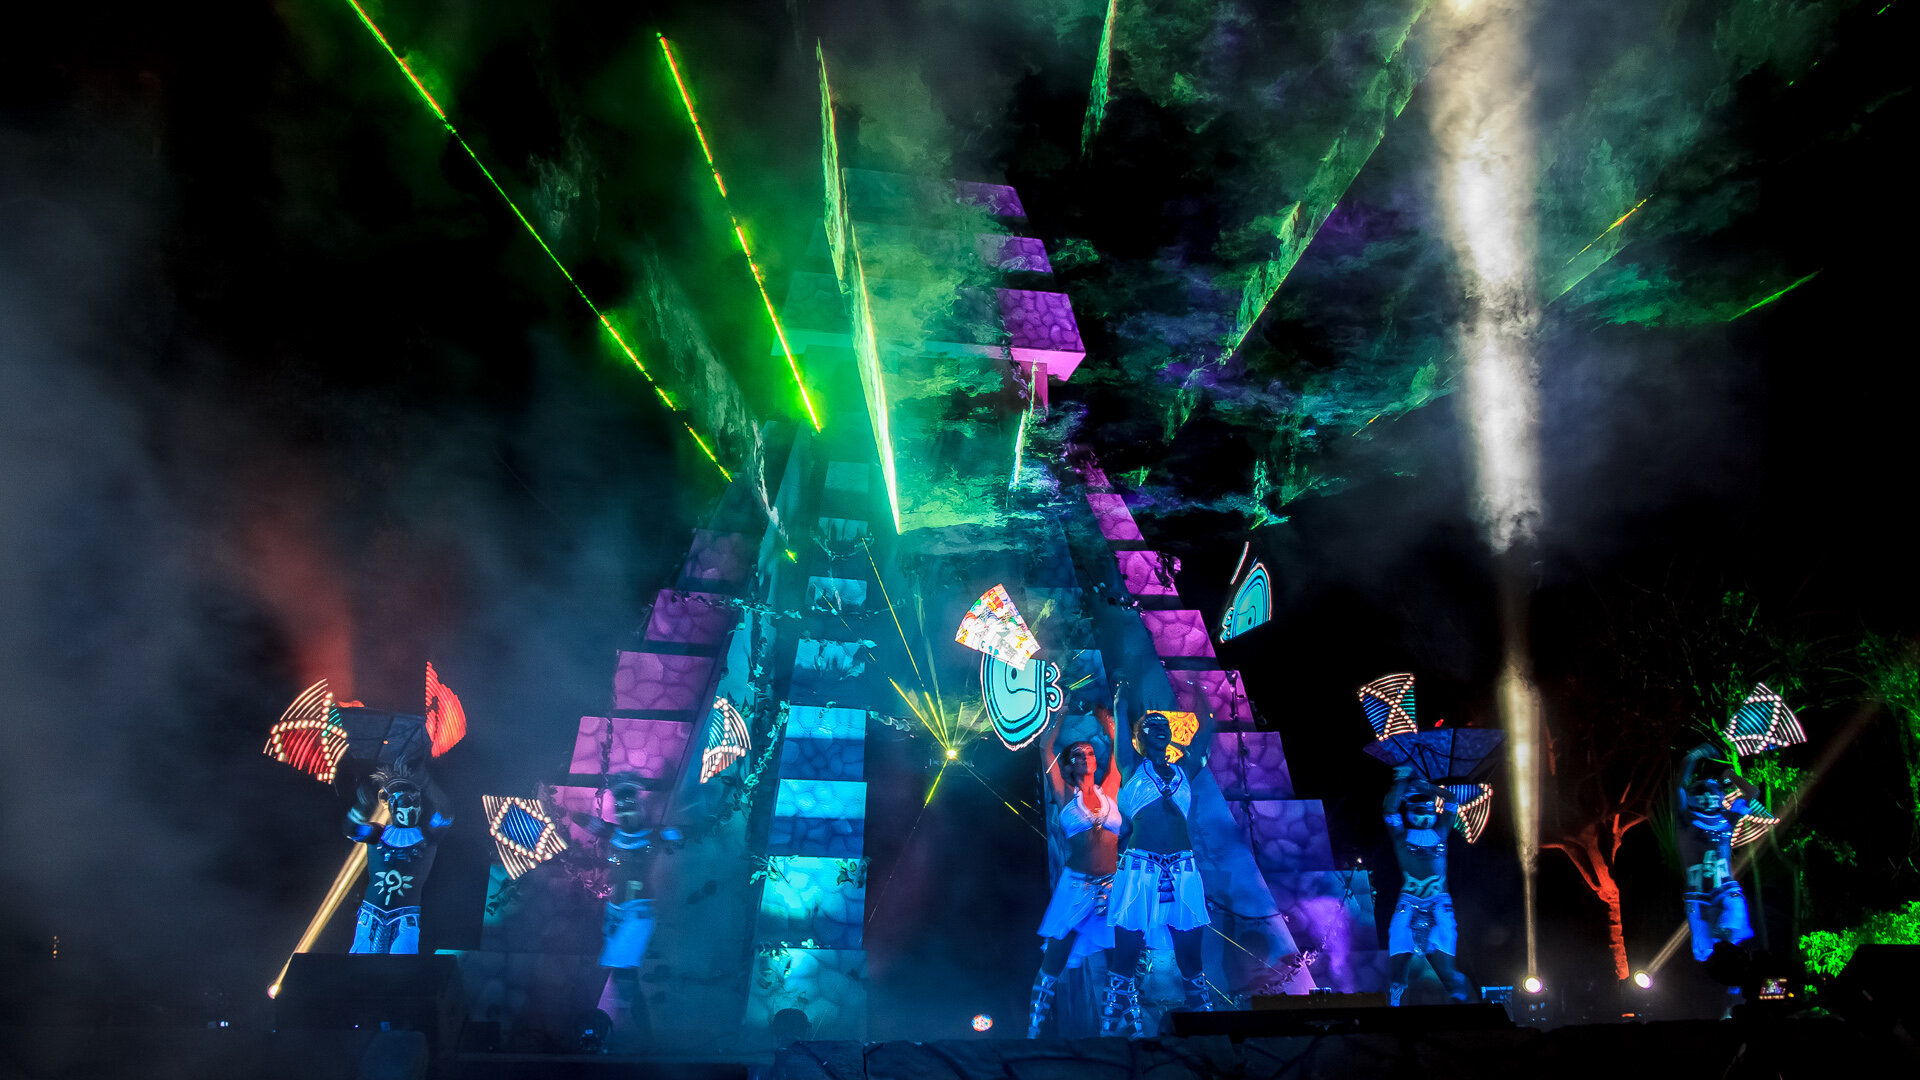 Mayan Future Temple Light Show with Lasers, Cancún, Mexico